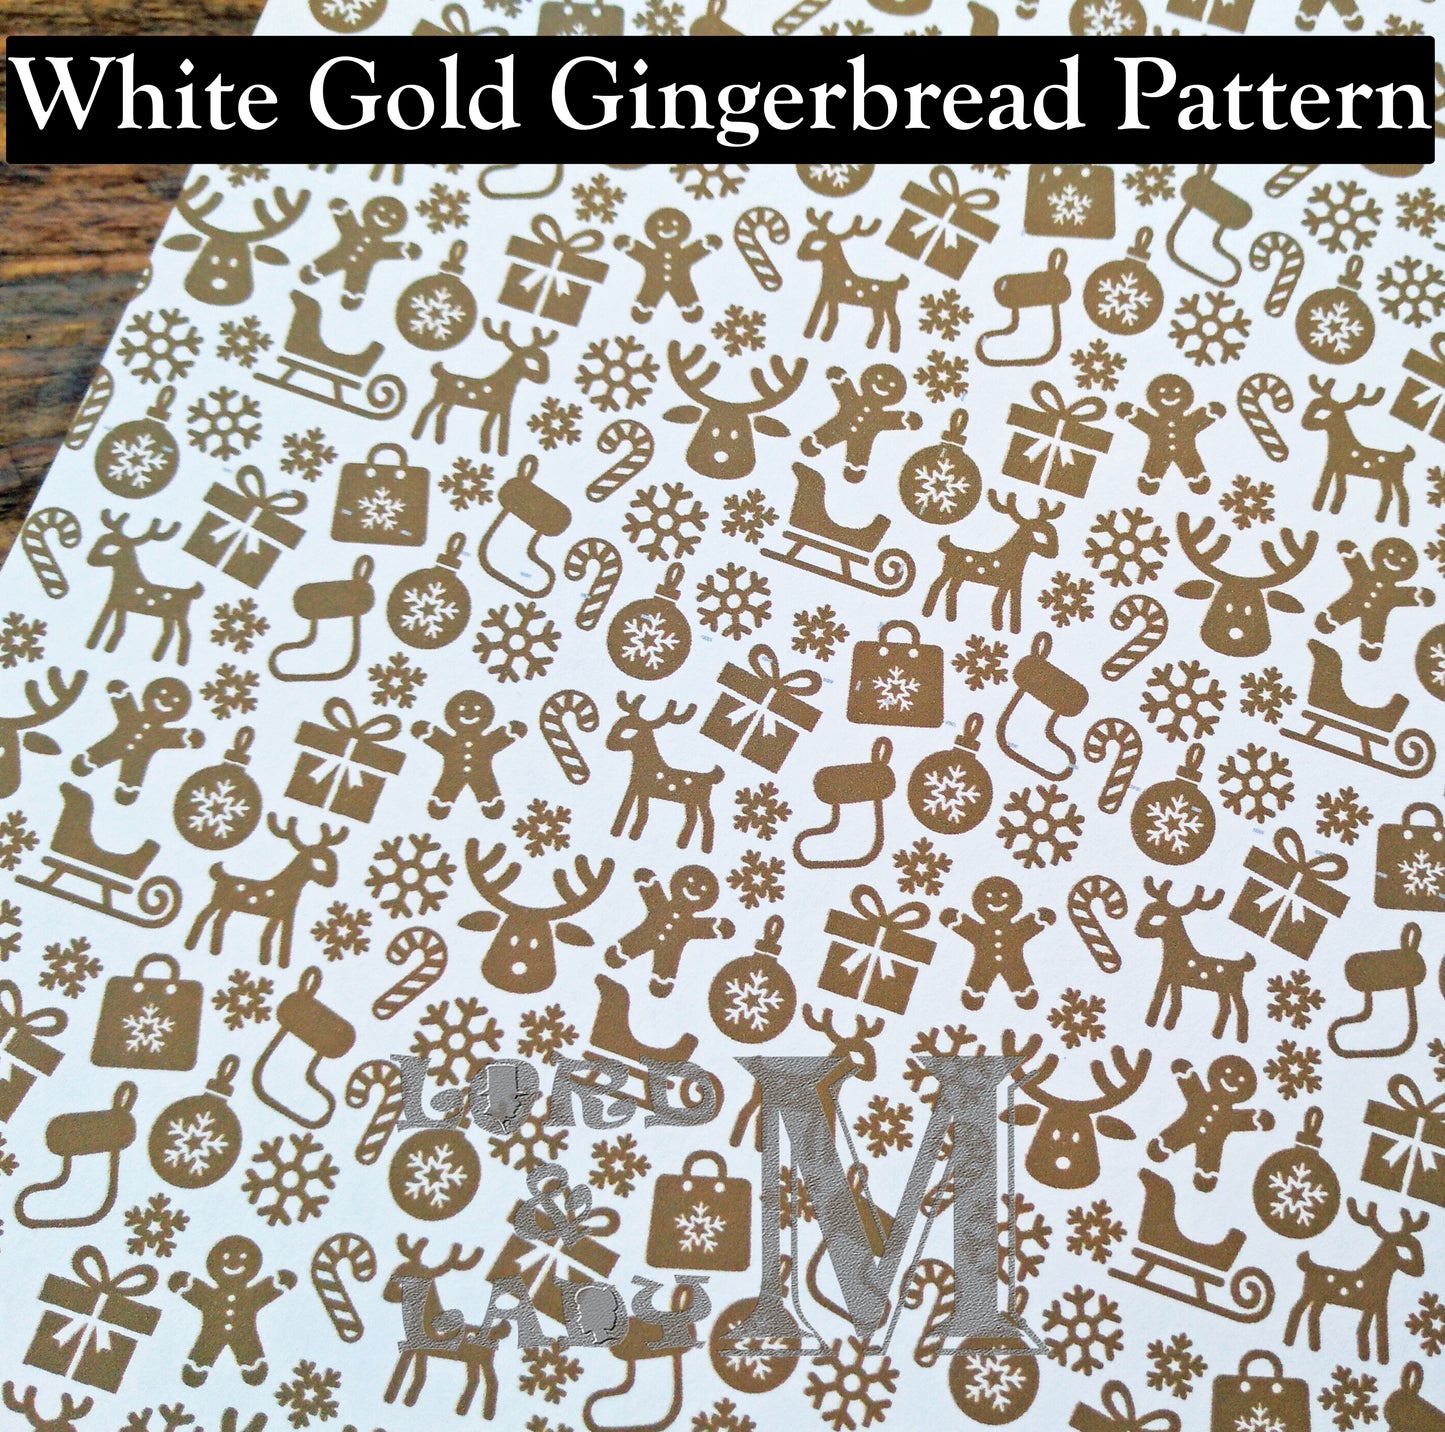 13cm - Personalised Letter From Santa - White Gold Gingerbread